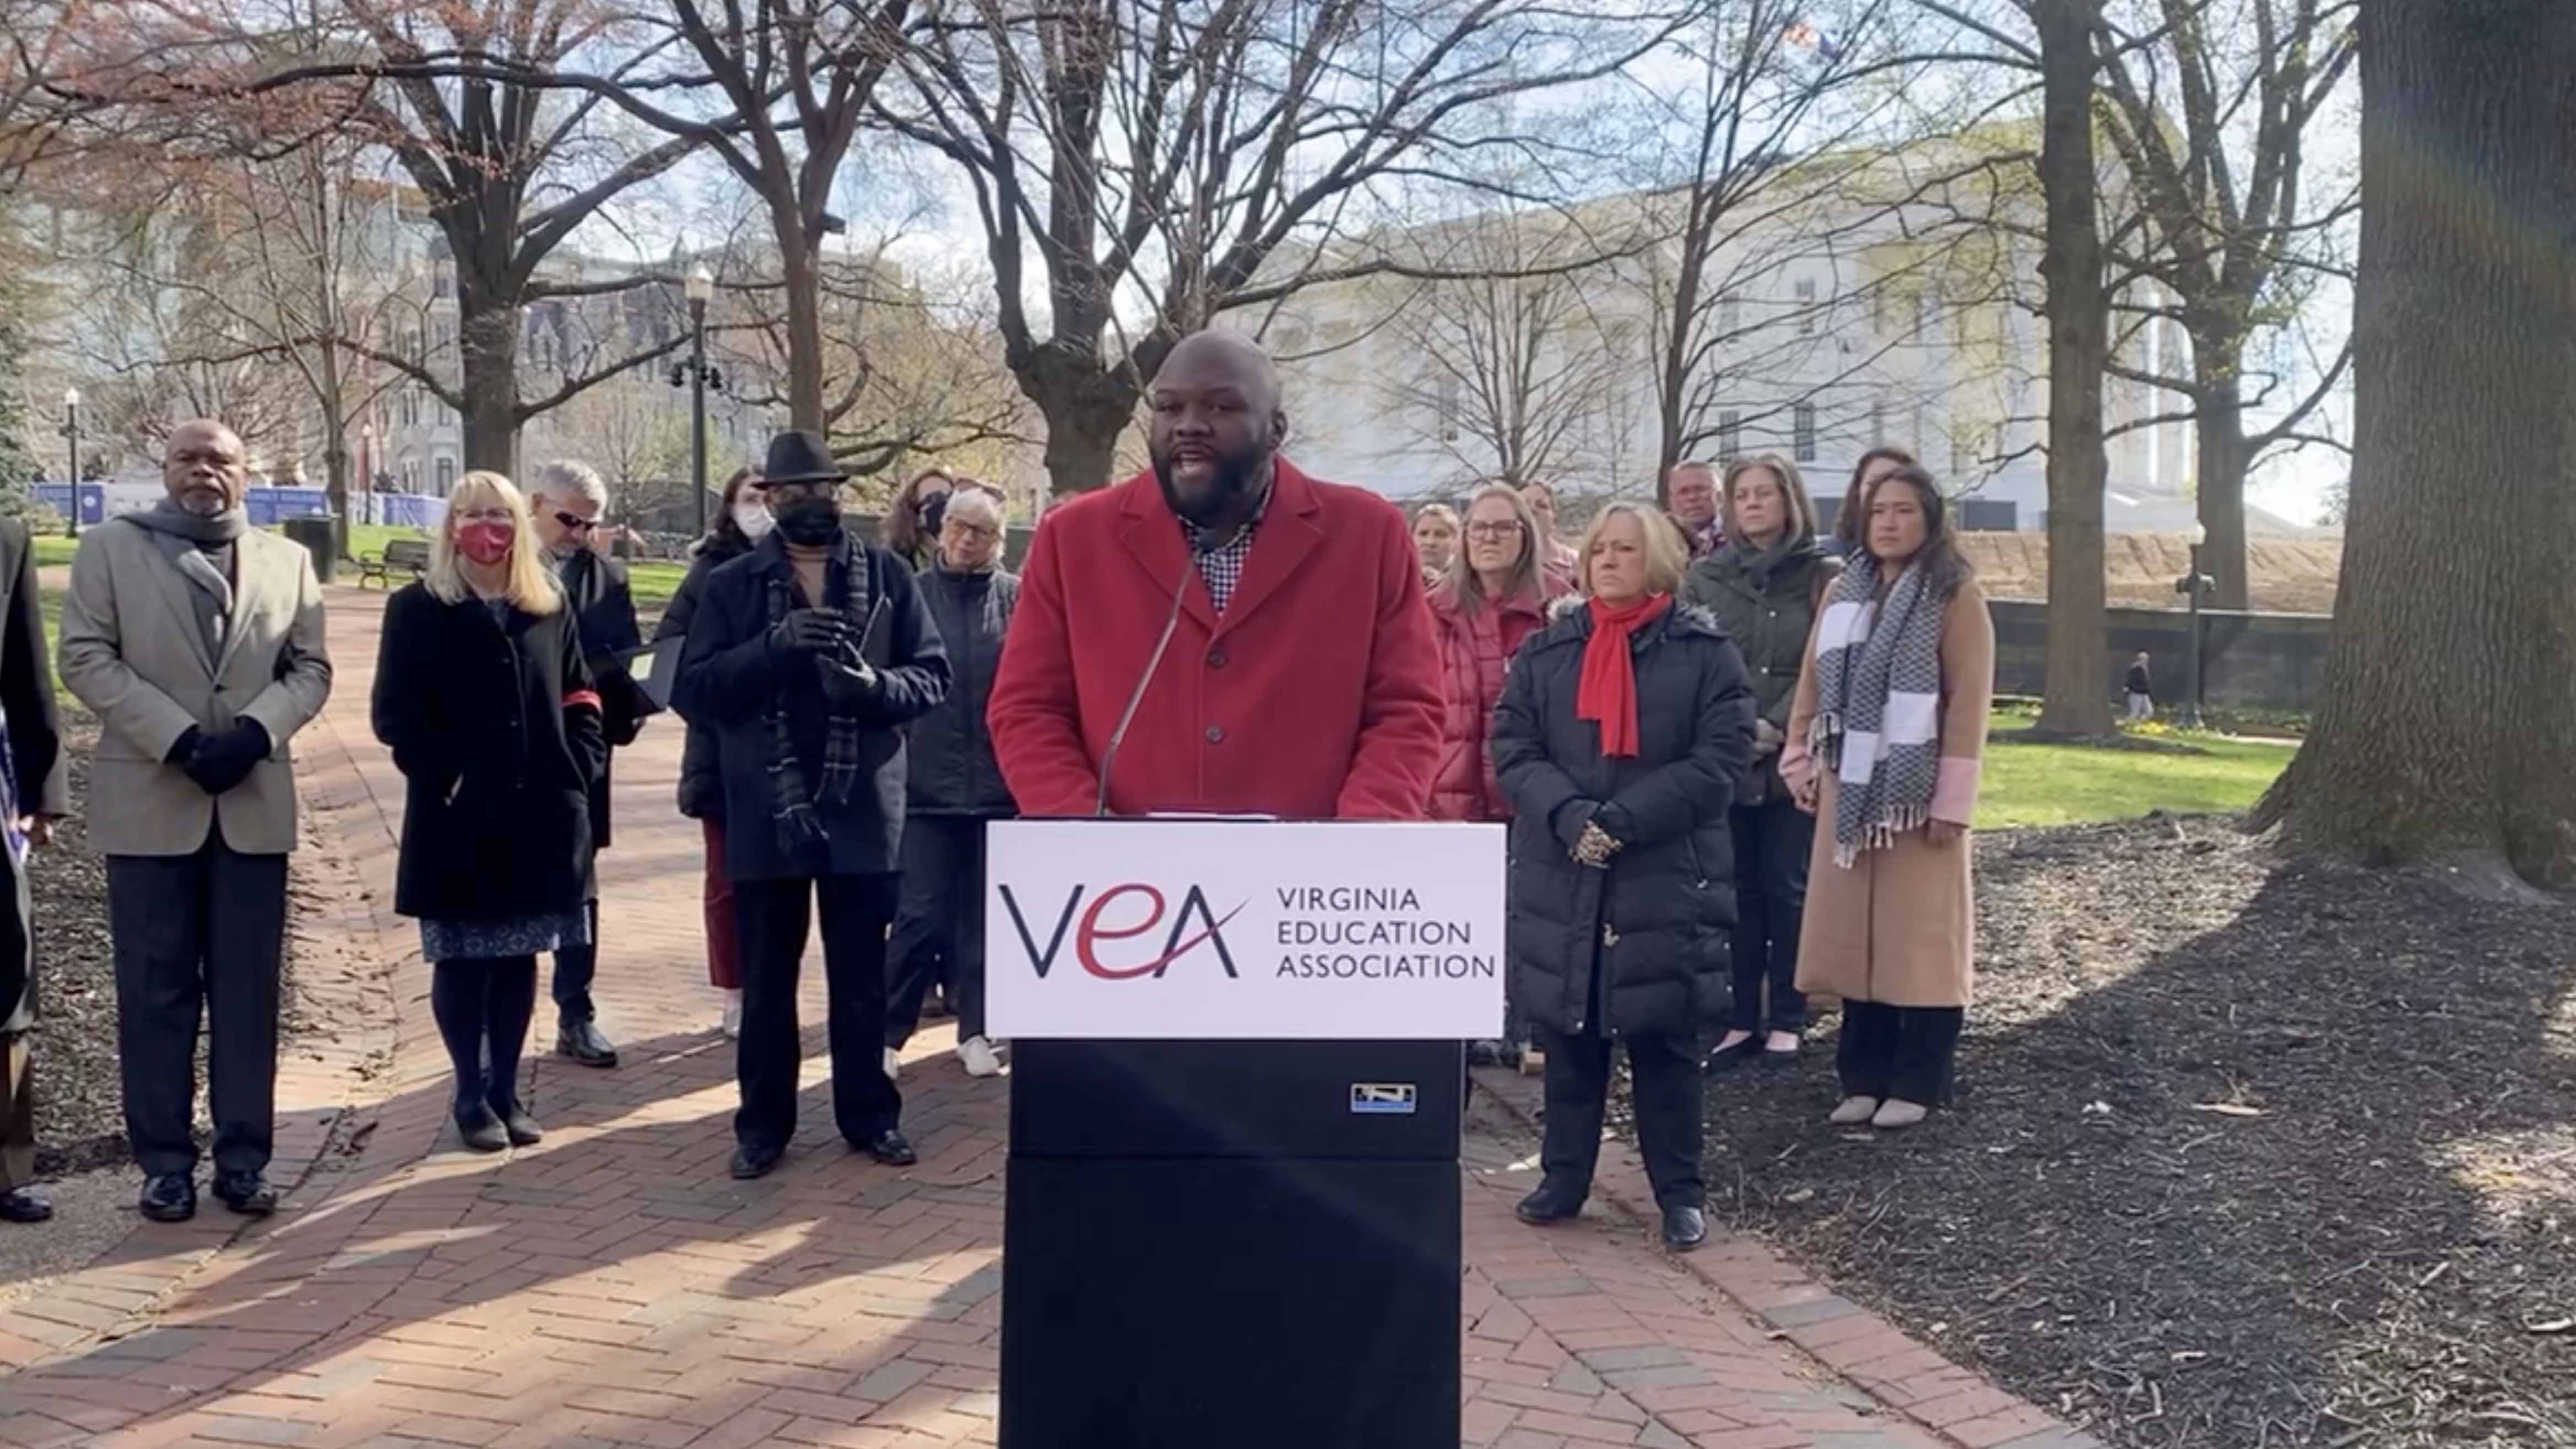 Photo by Michael Pope, Virginia Public Radio. James Fedderman, an Accomack County teacher and president of the VEA, said the group will post resources in danger of being removed from state websites.